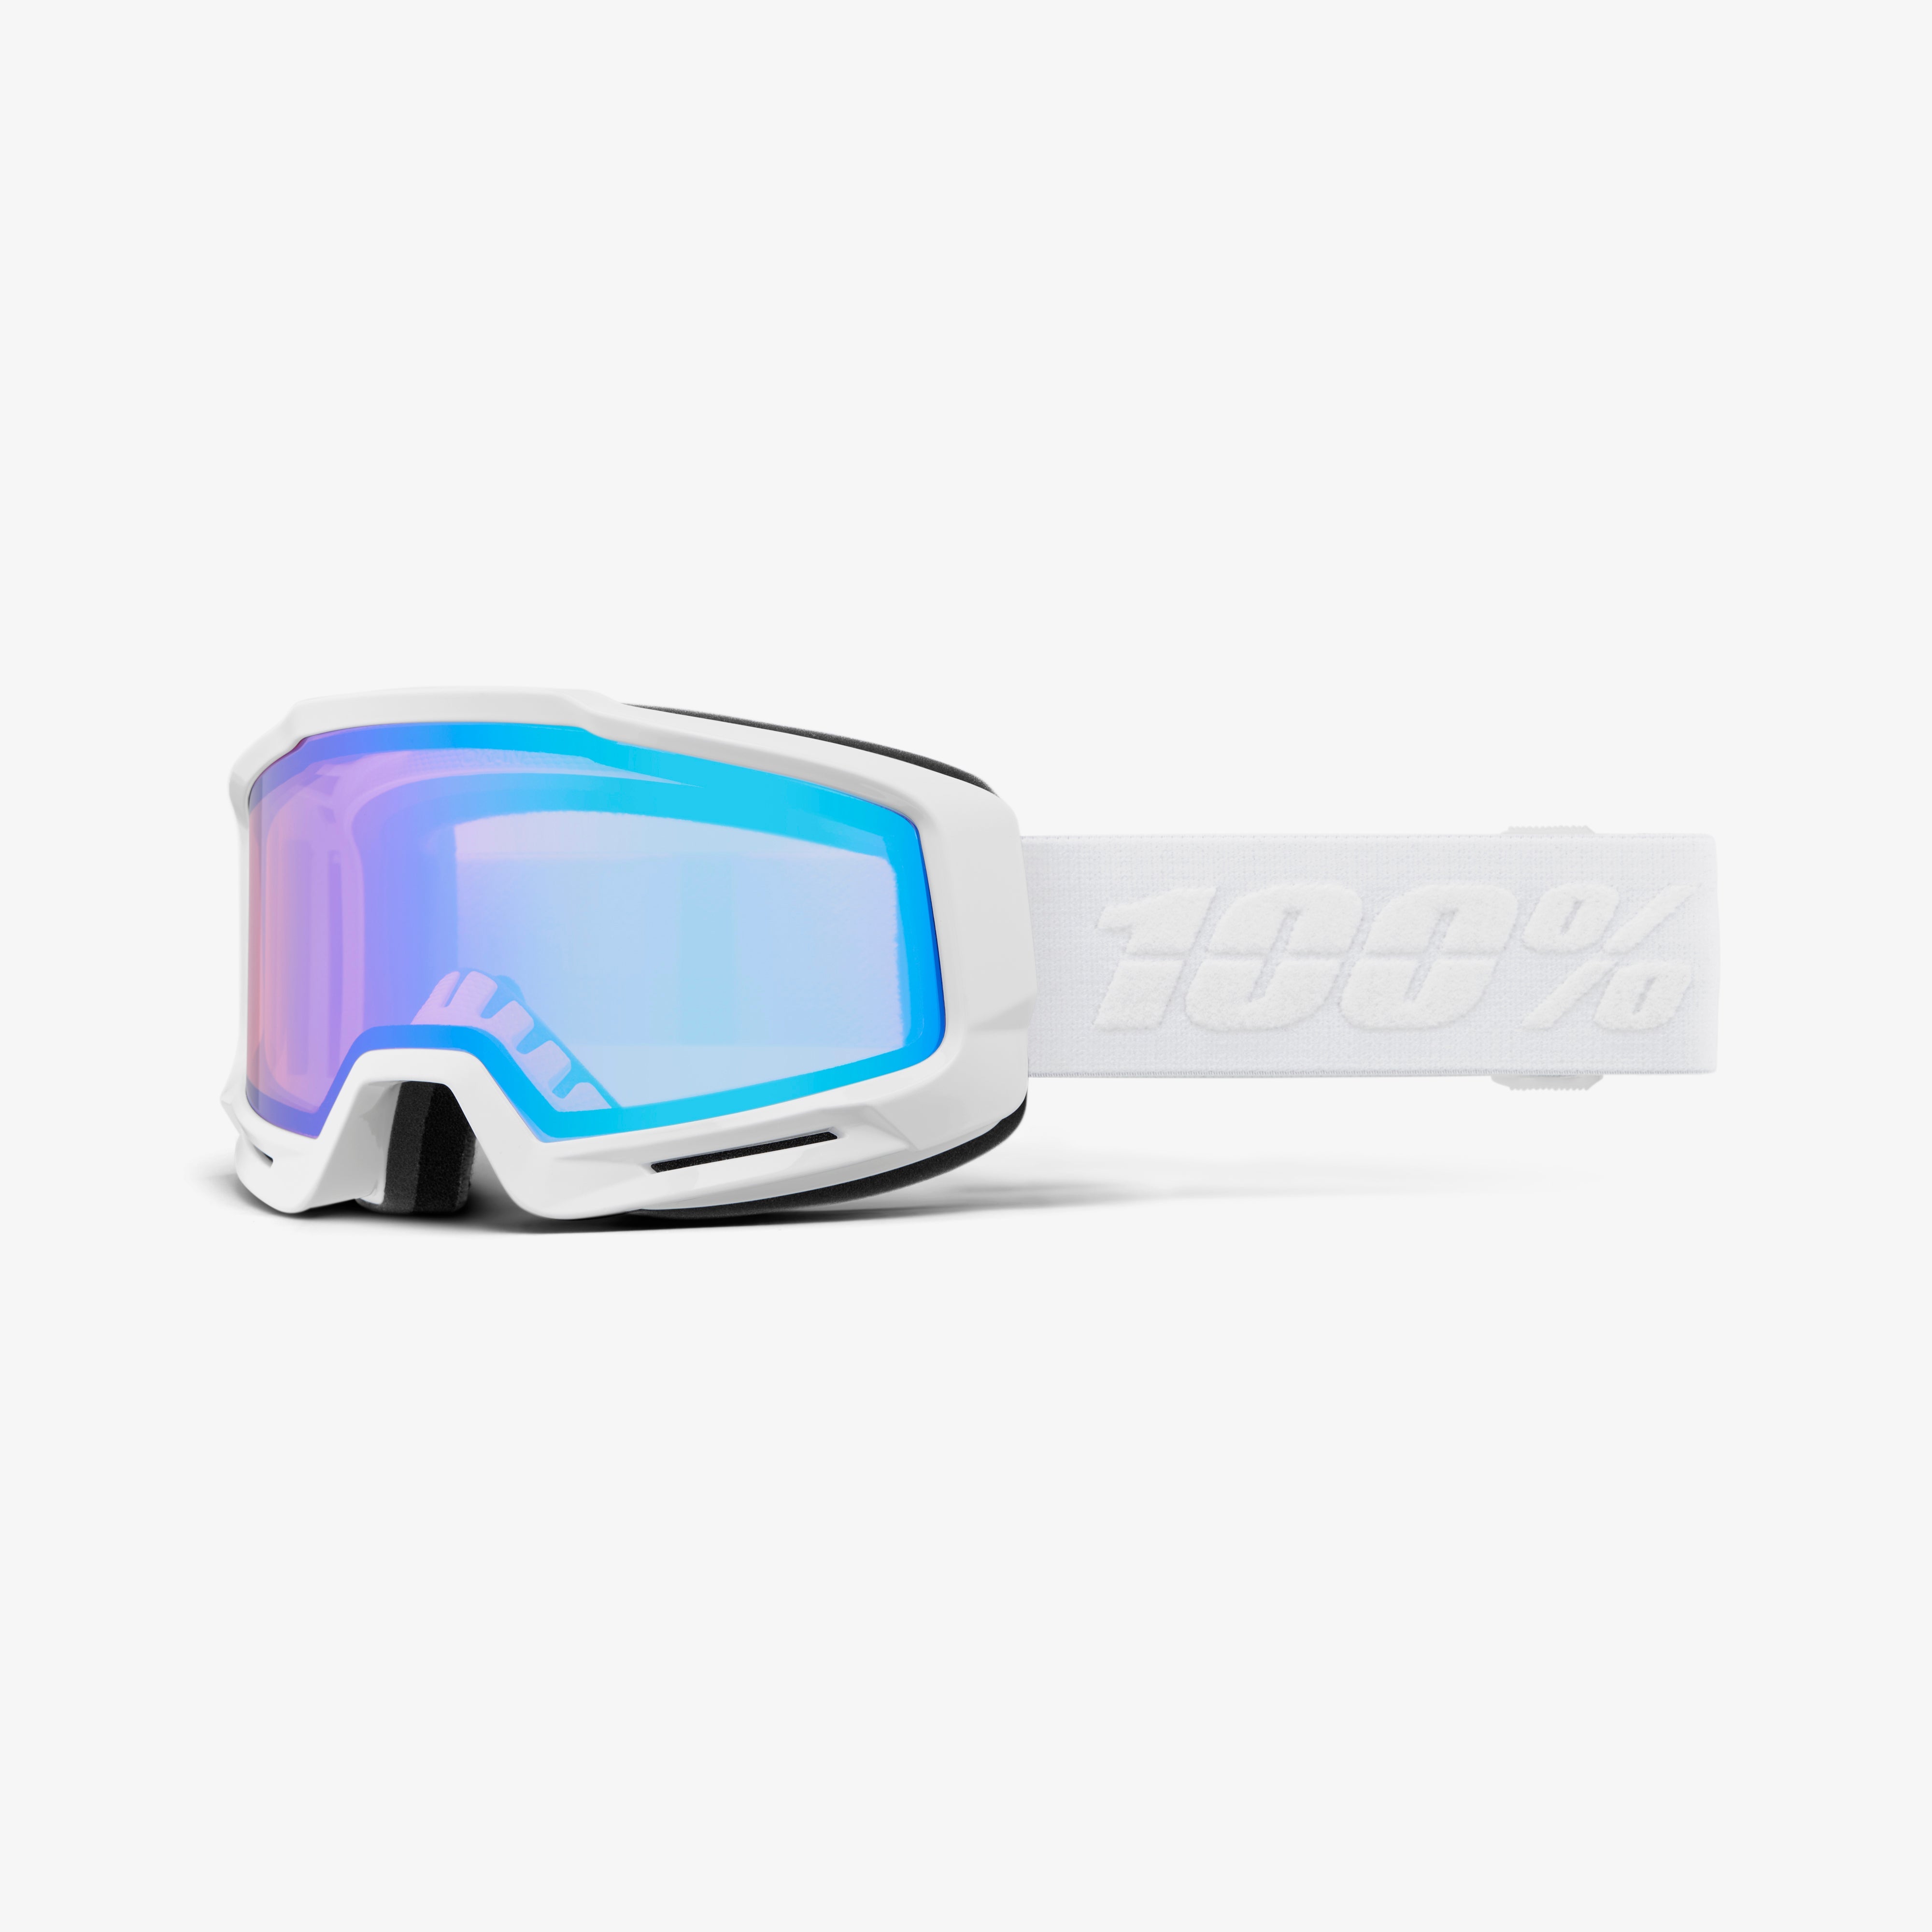 OKAN AF HiPER Goggle White/Turquoise